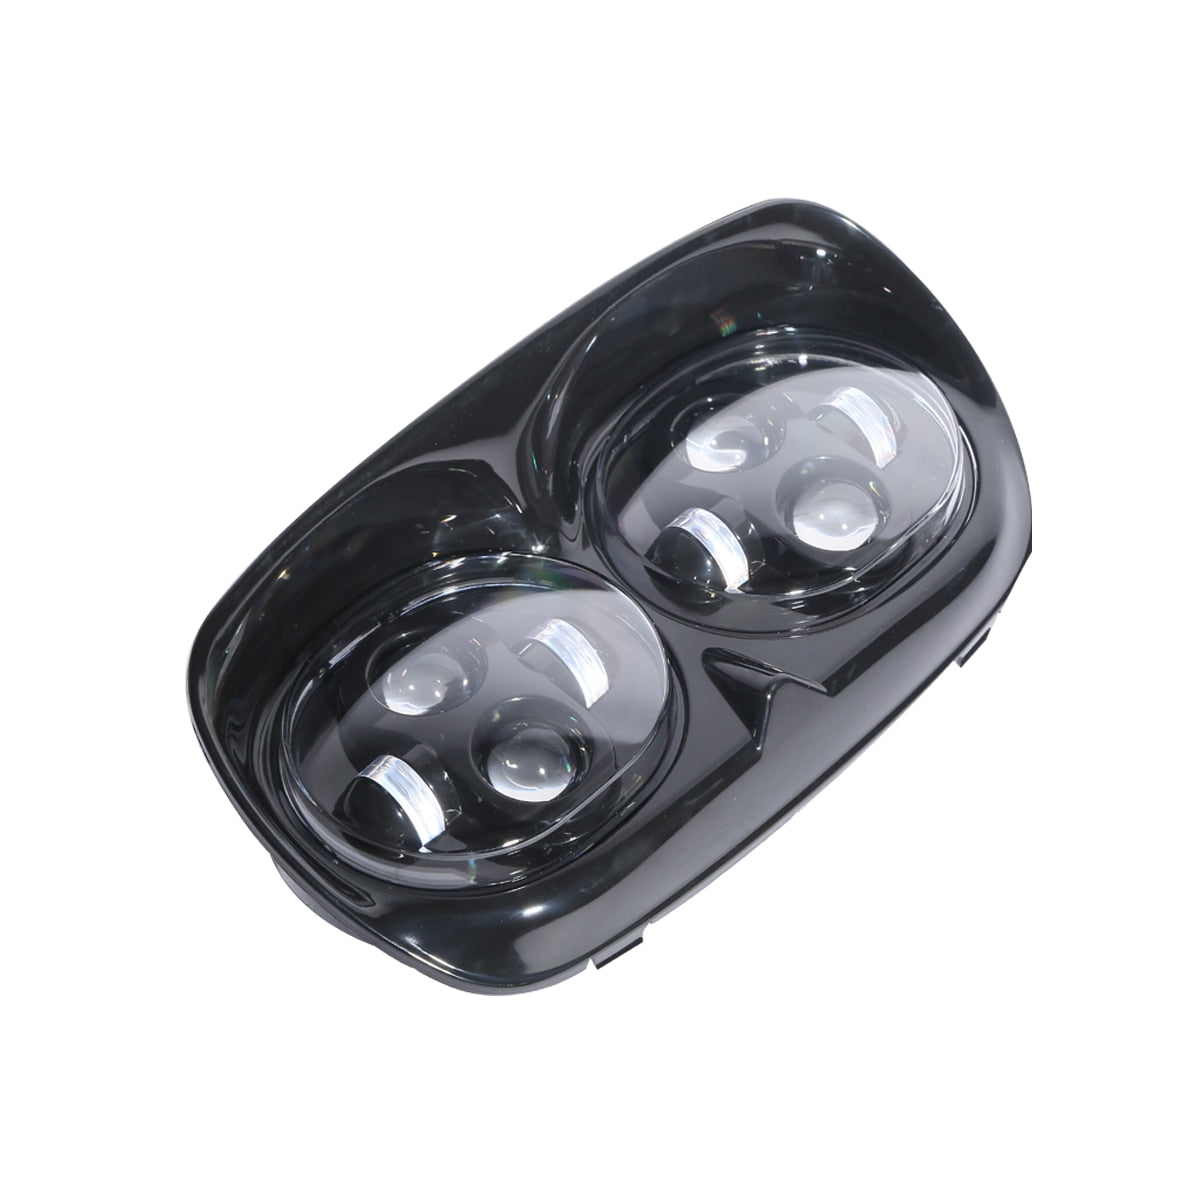 Voodoo Cycle House Dual LED Headlight For Harley-Davidson Road Glide 1998-2013